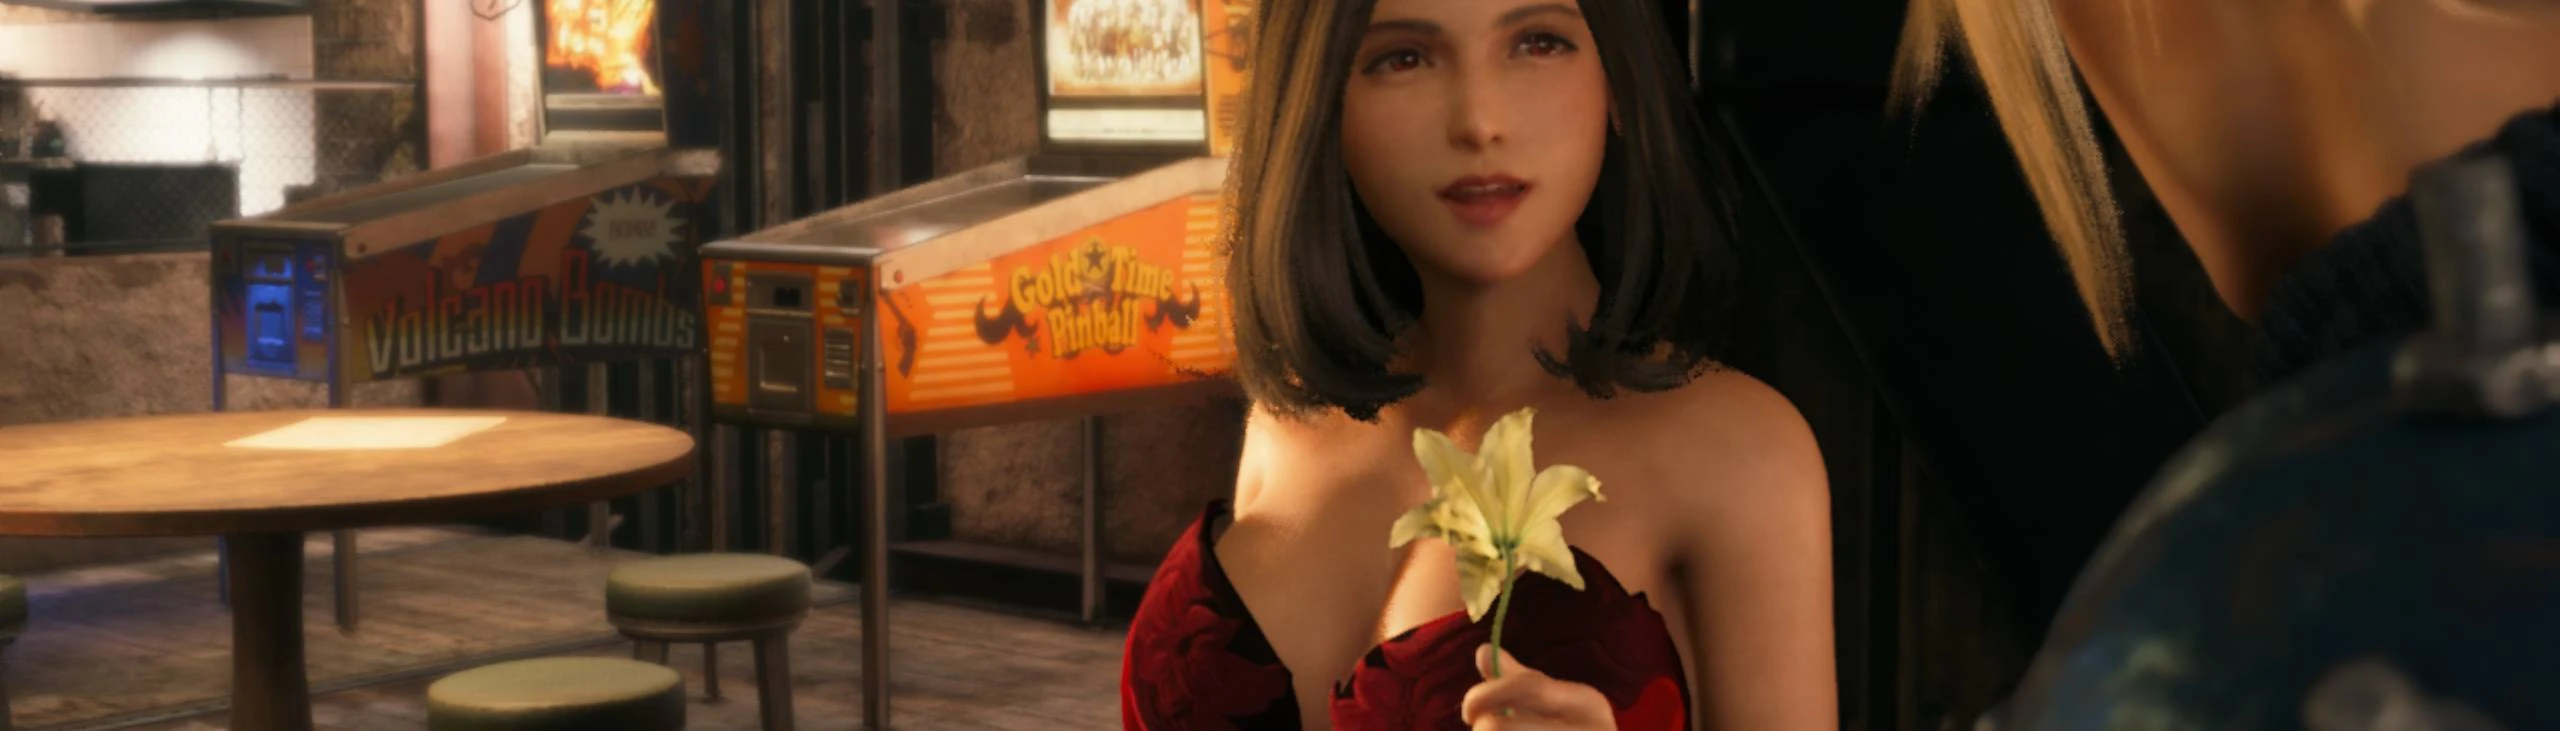 New Final Fantasy VII Remake PC Mod Adds a Flirty Dress for Aerith